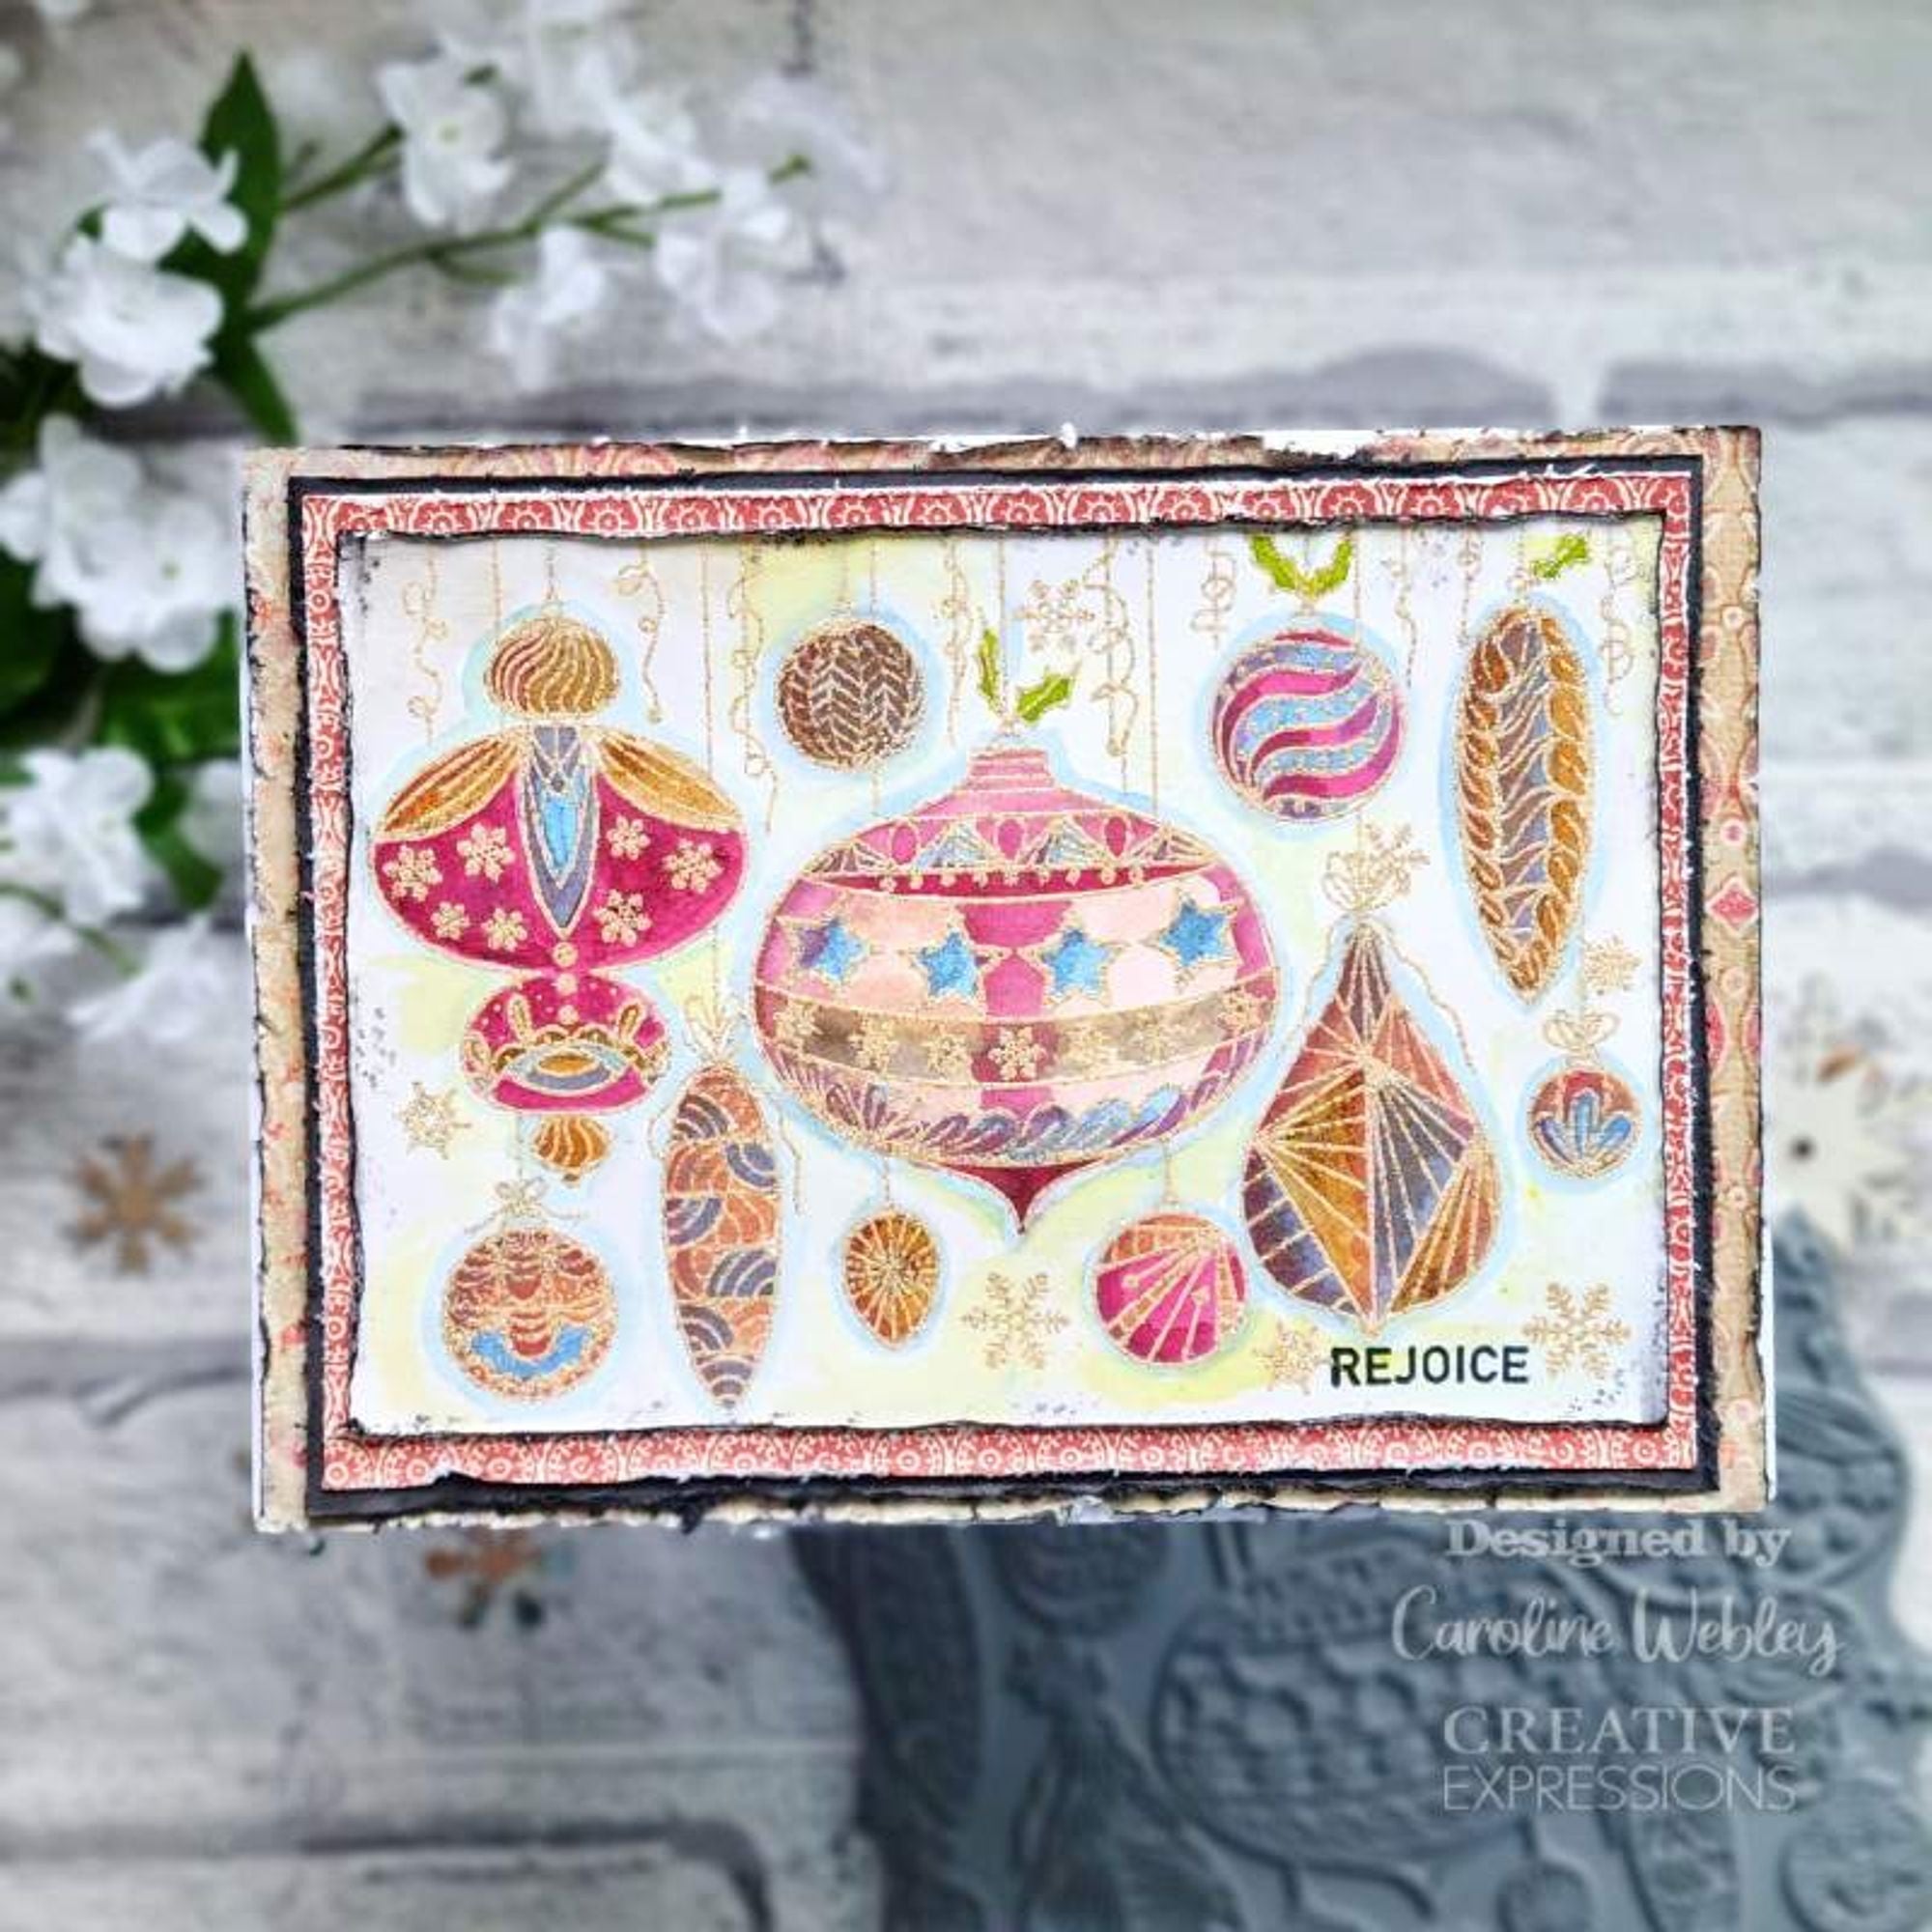 Creative Expressions Bonnita Moaby Vintage Baubles 5.8 in x 4 in Rubber Stamp